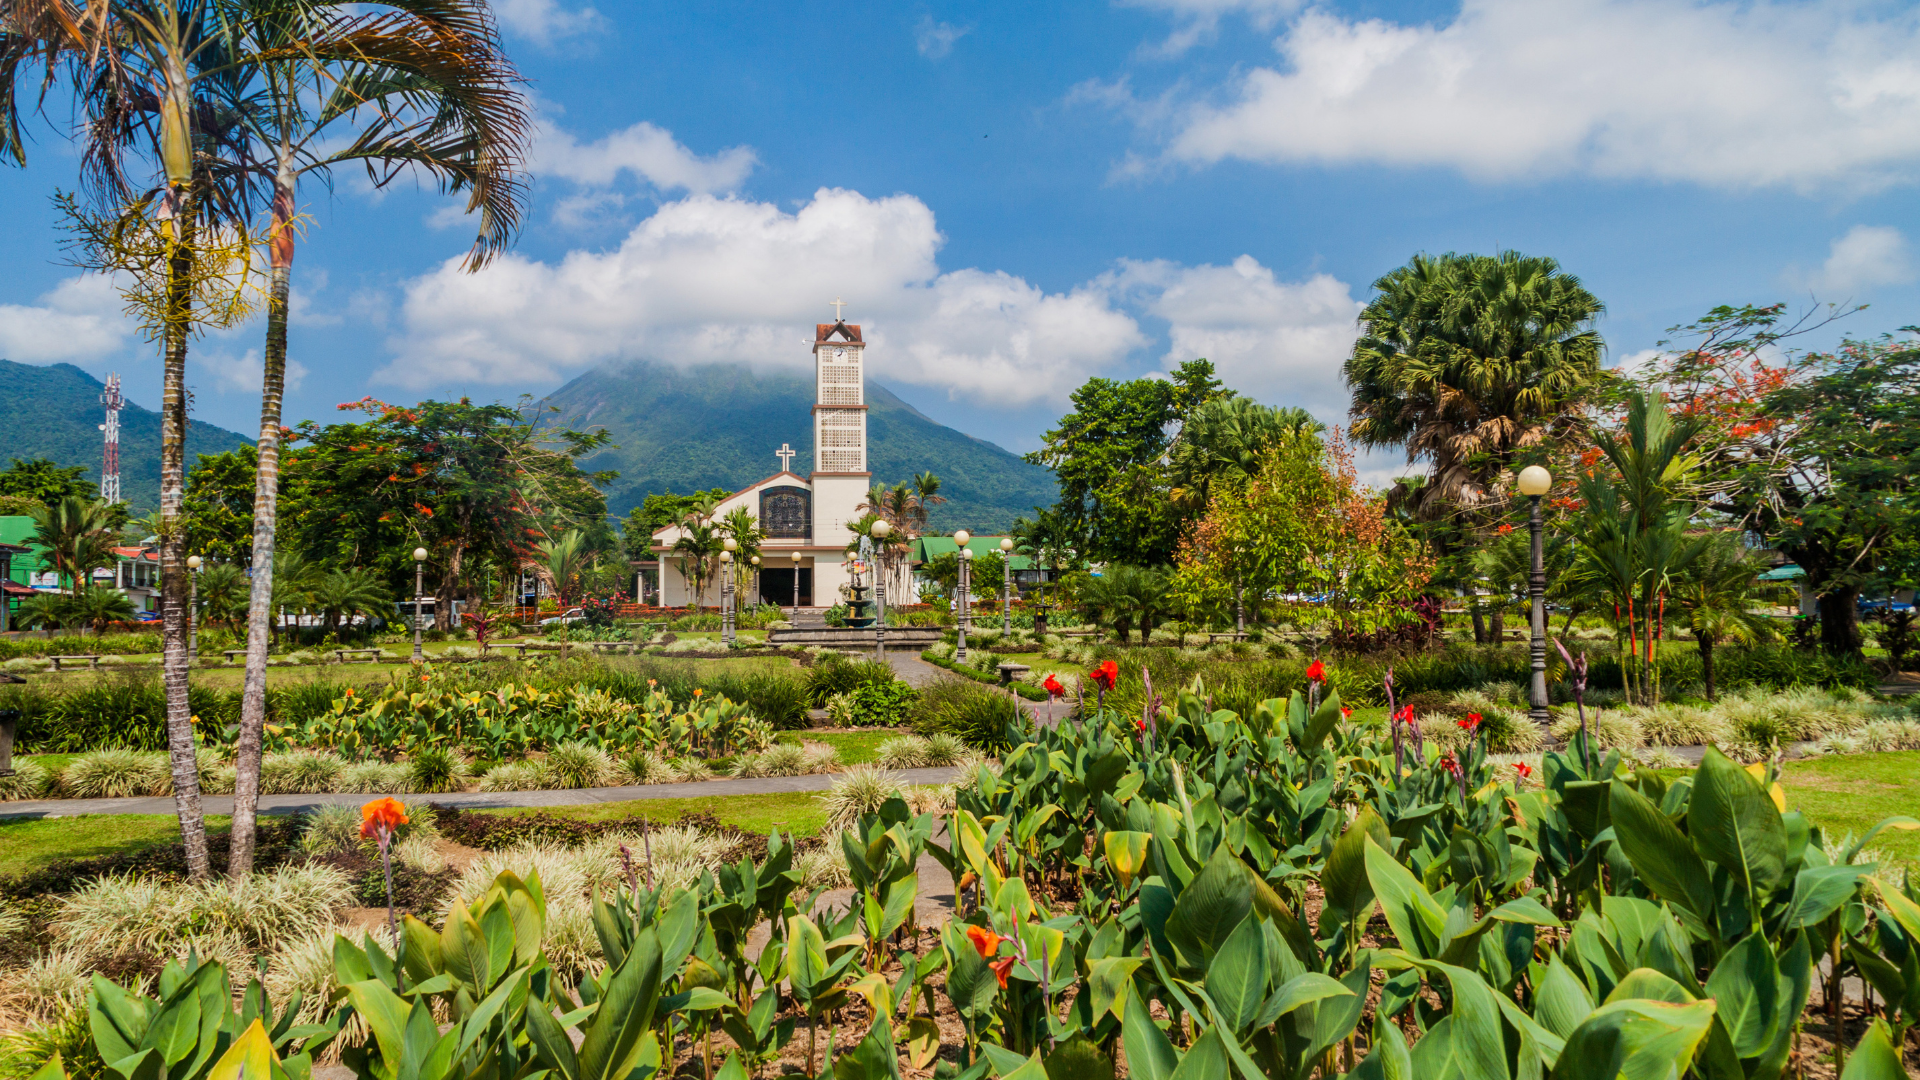 Discover the best flight options for your journey to La Fortuna.